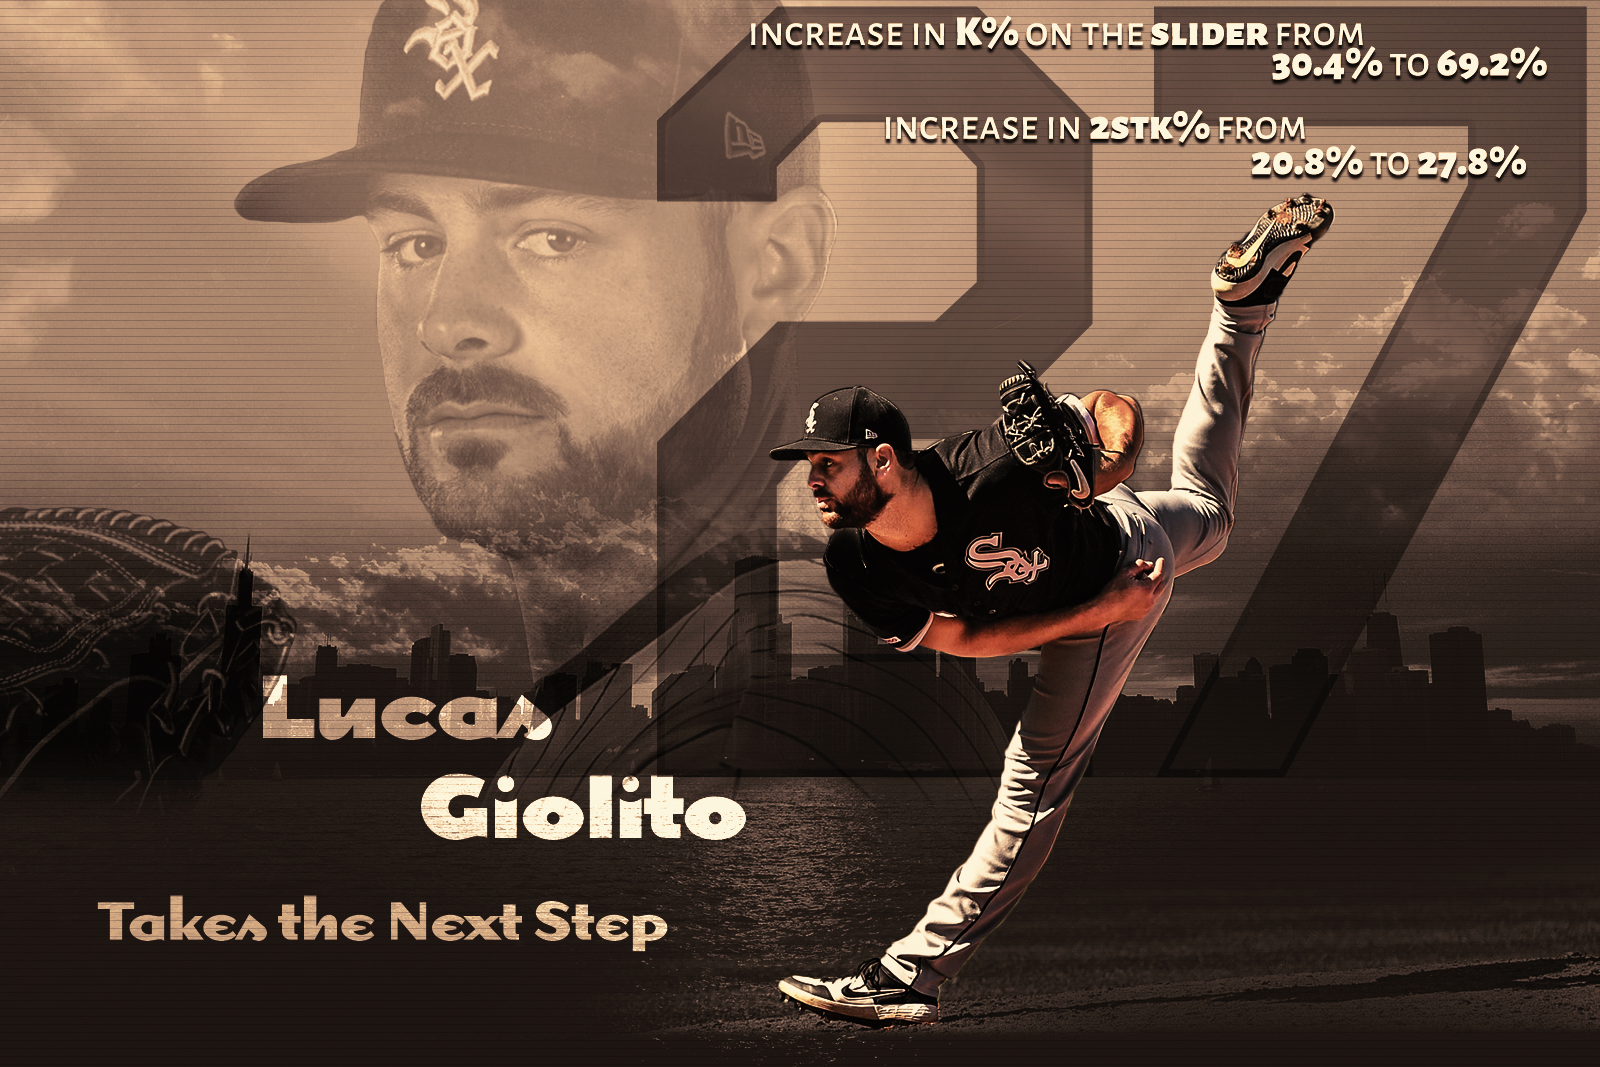 Going Deep - Is Lucas Giolito now a GioDUDE?